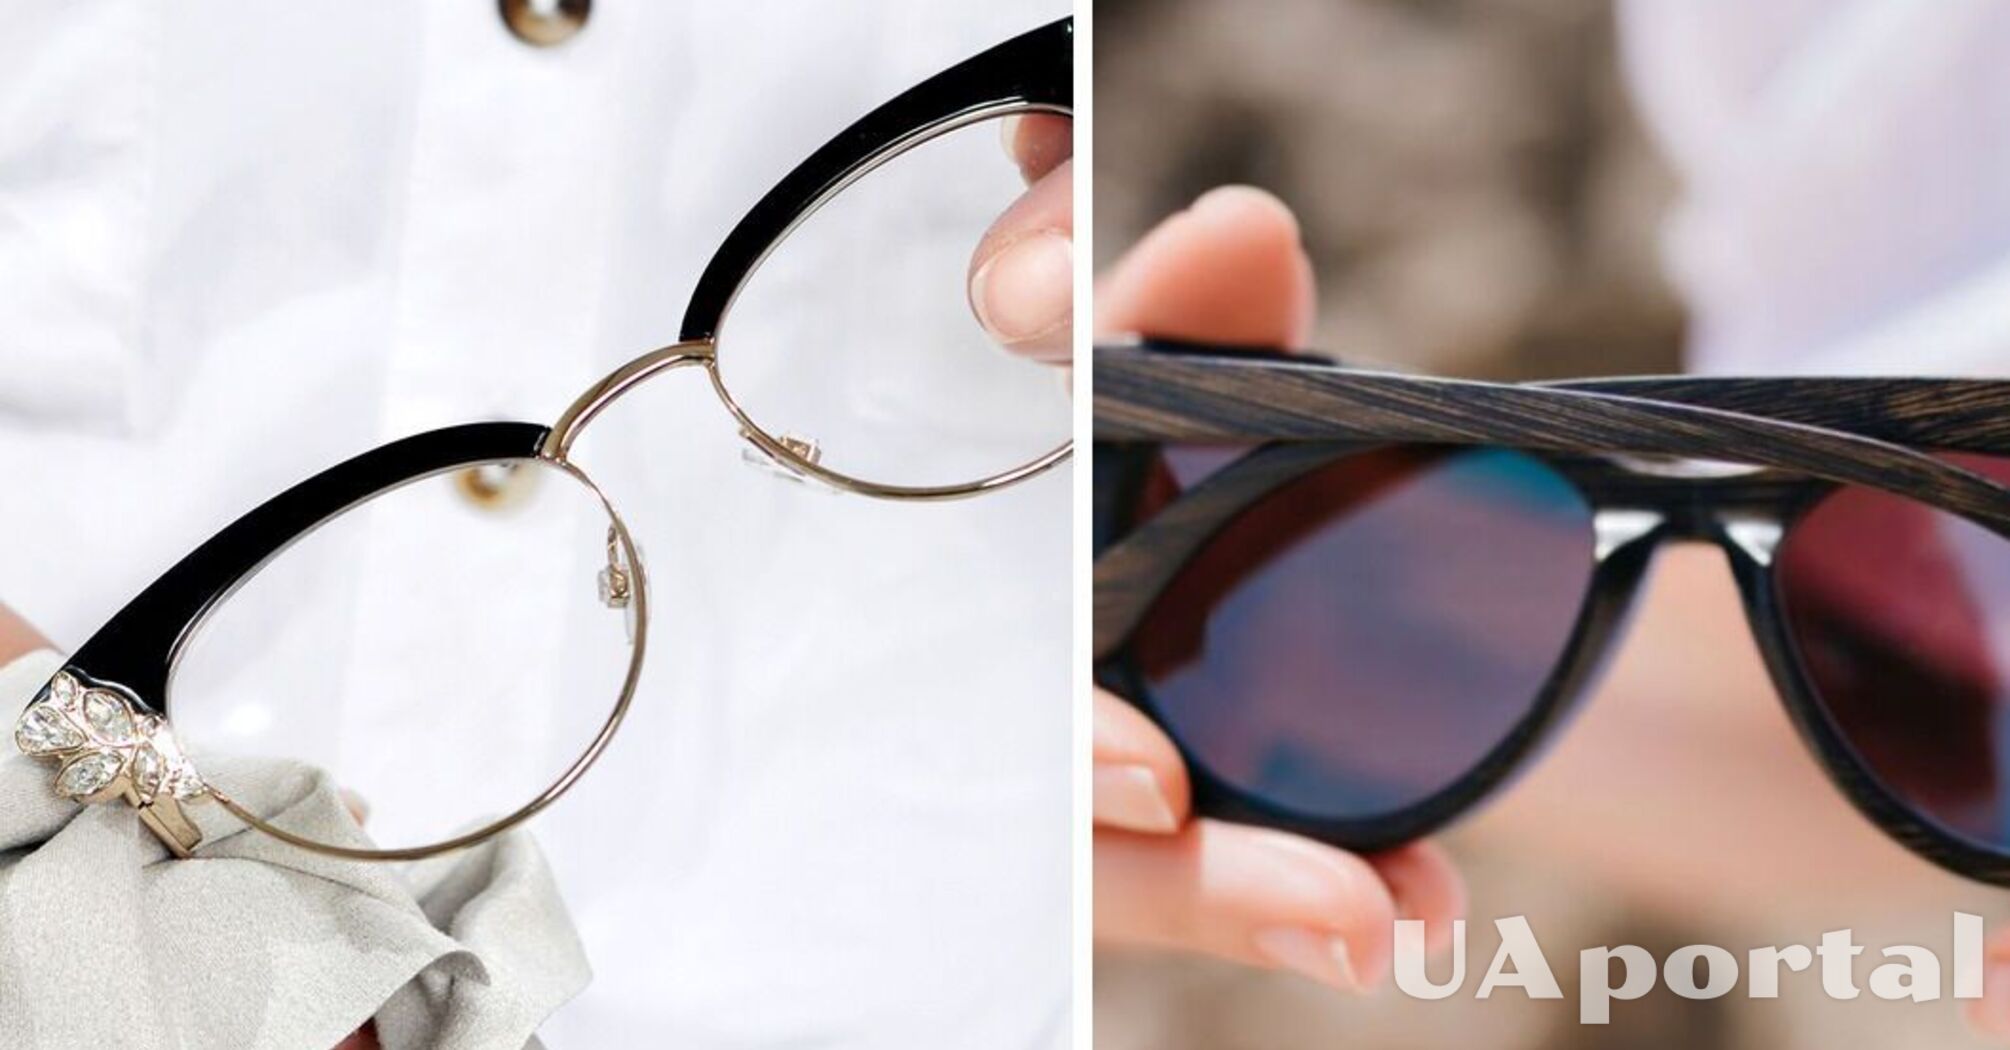 How to remove scratches on glasses: an effective life hack